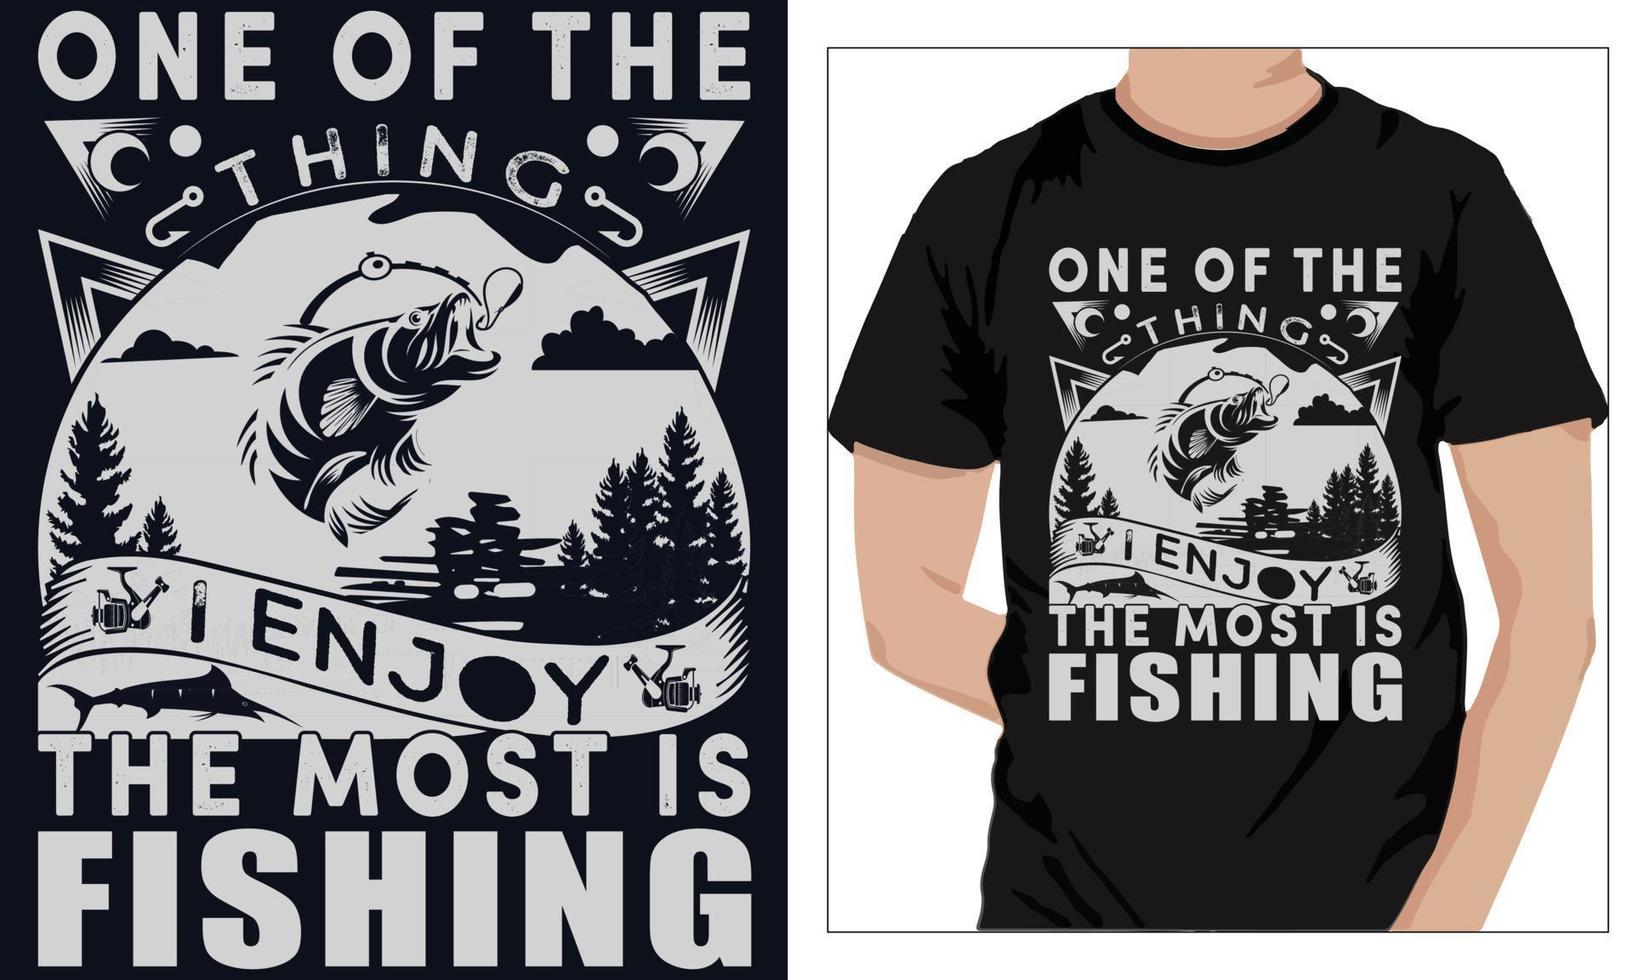 fishing t-shirt design ONE OF THE THING I ENJOY THE MOST IS FISHING vector